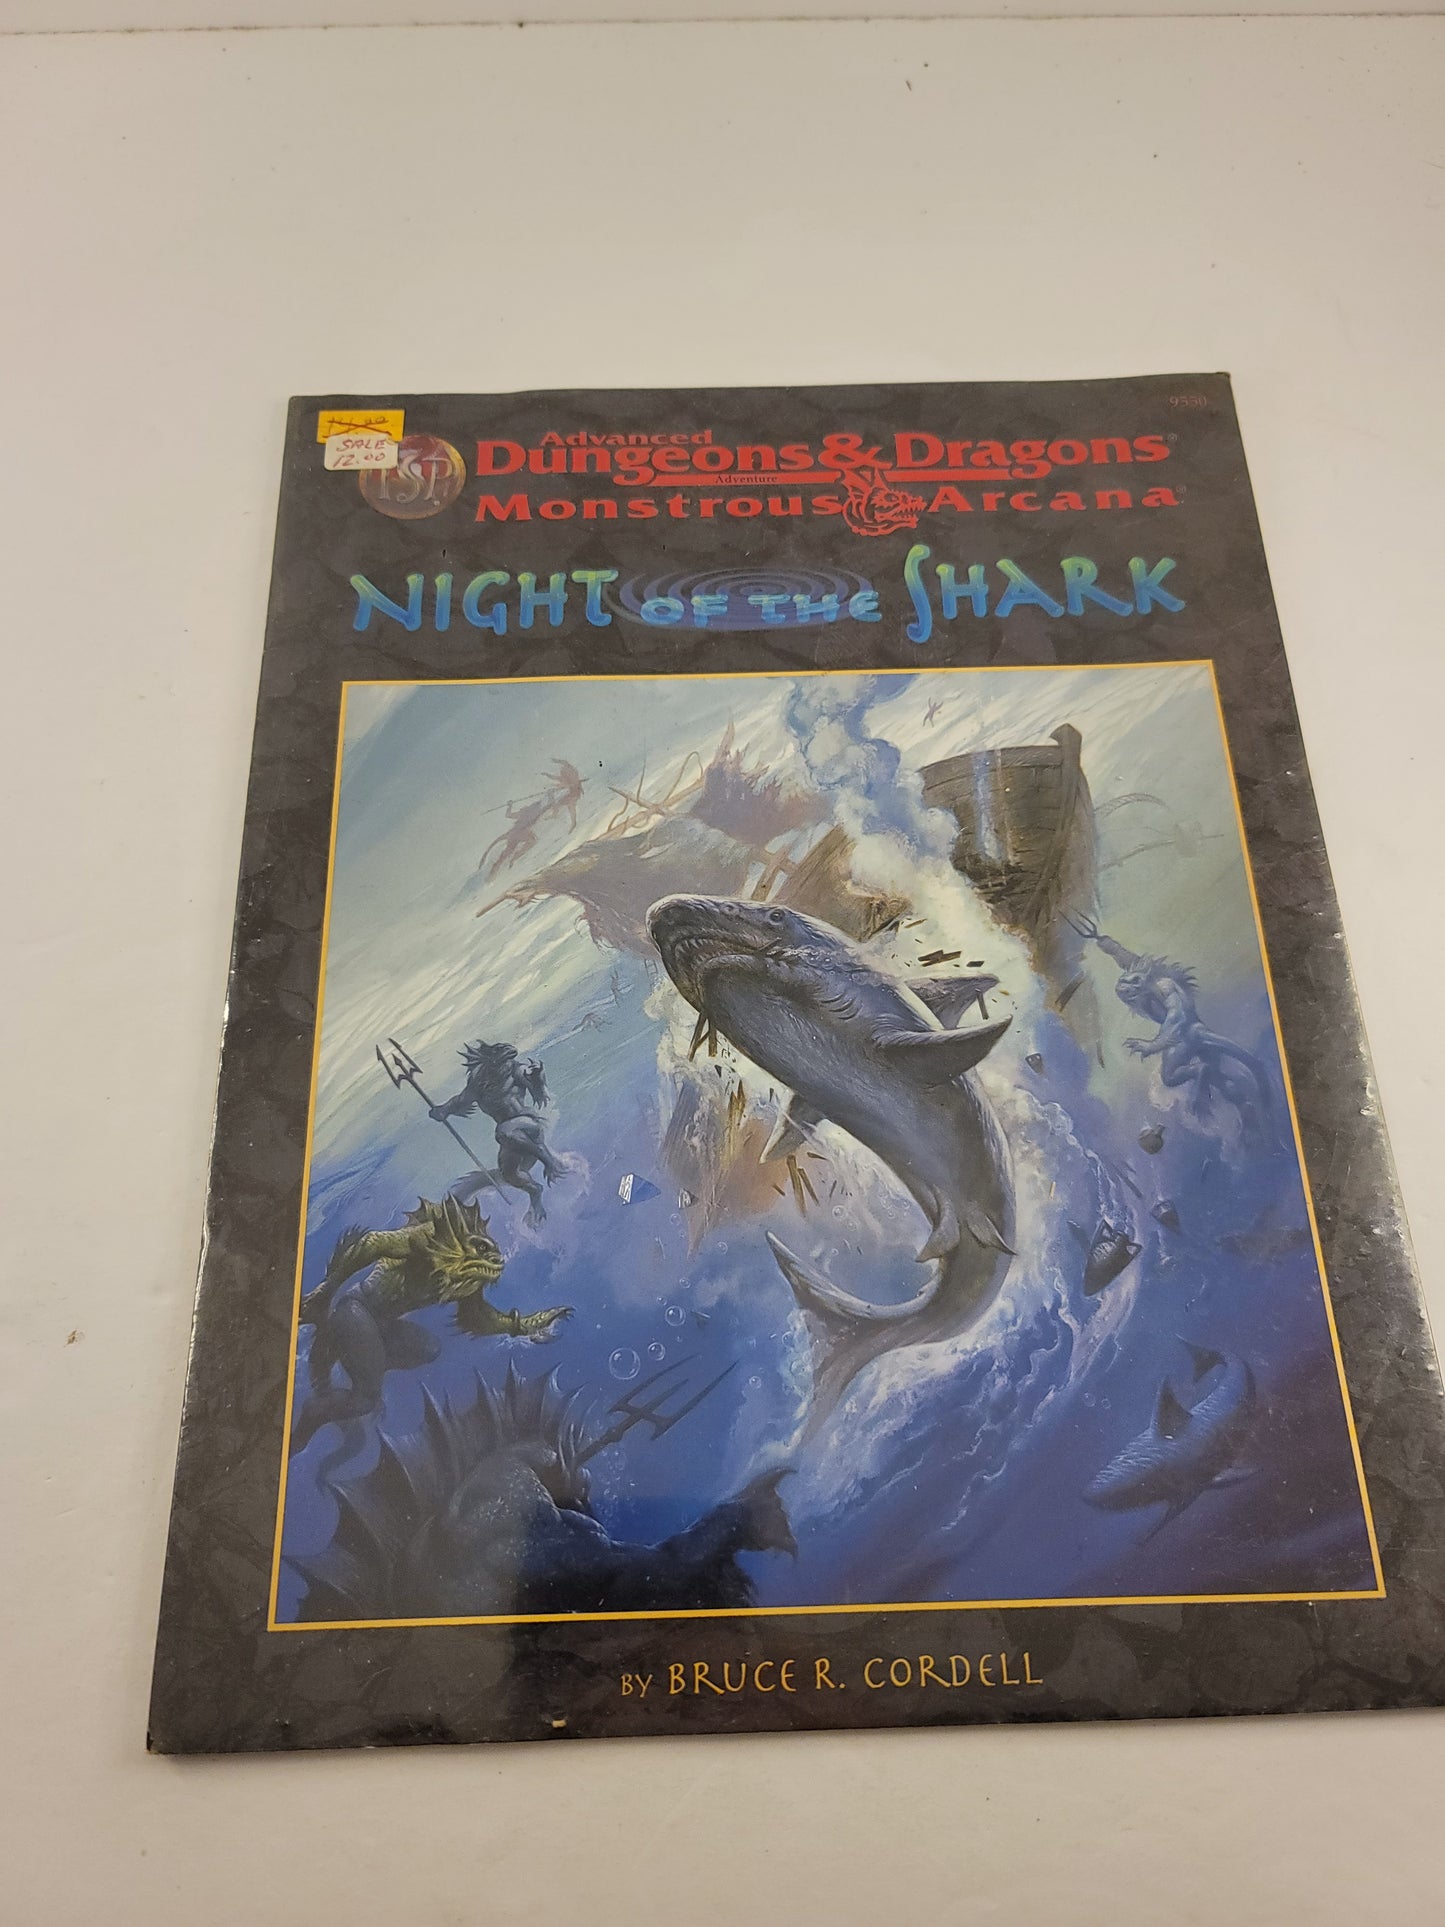 Advanced Dungeons And Dragons Monstrous Arcana - Night of the Shark